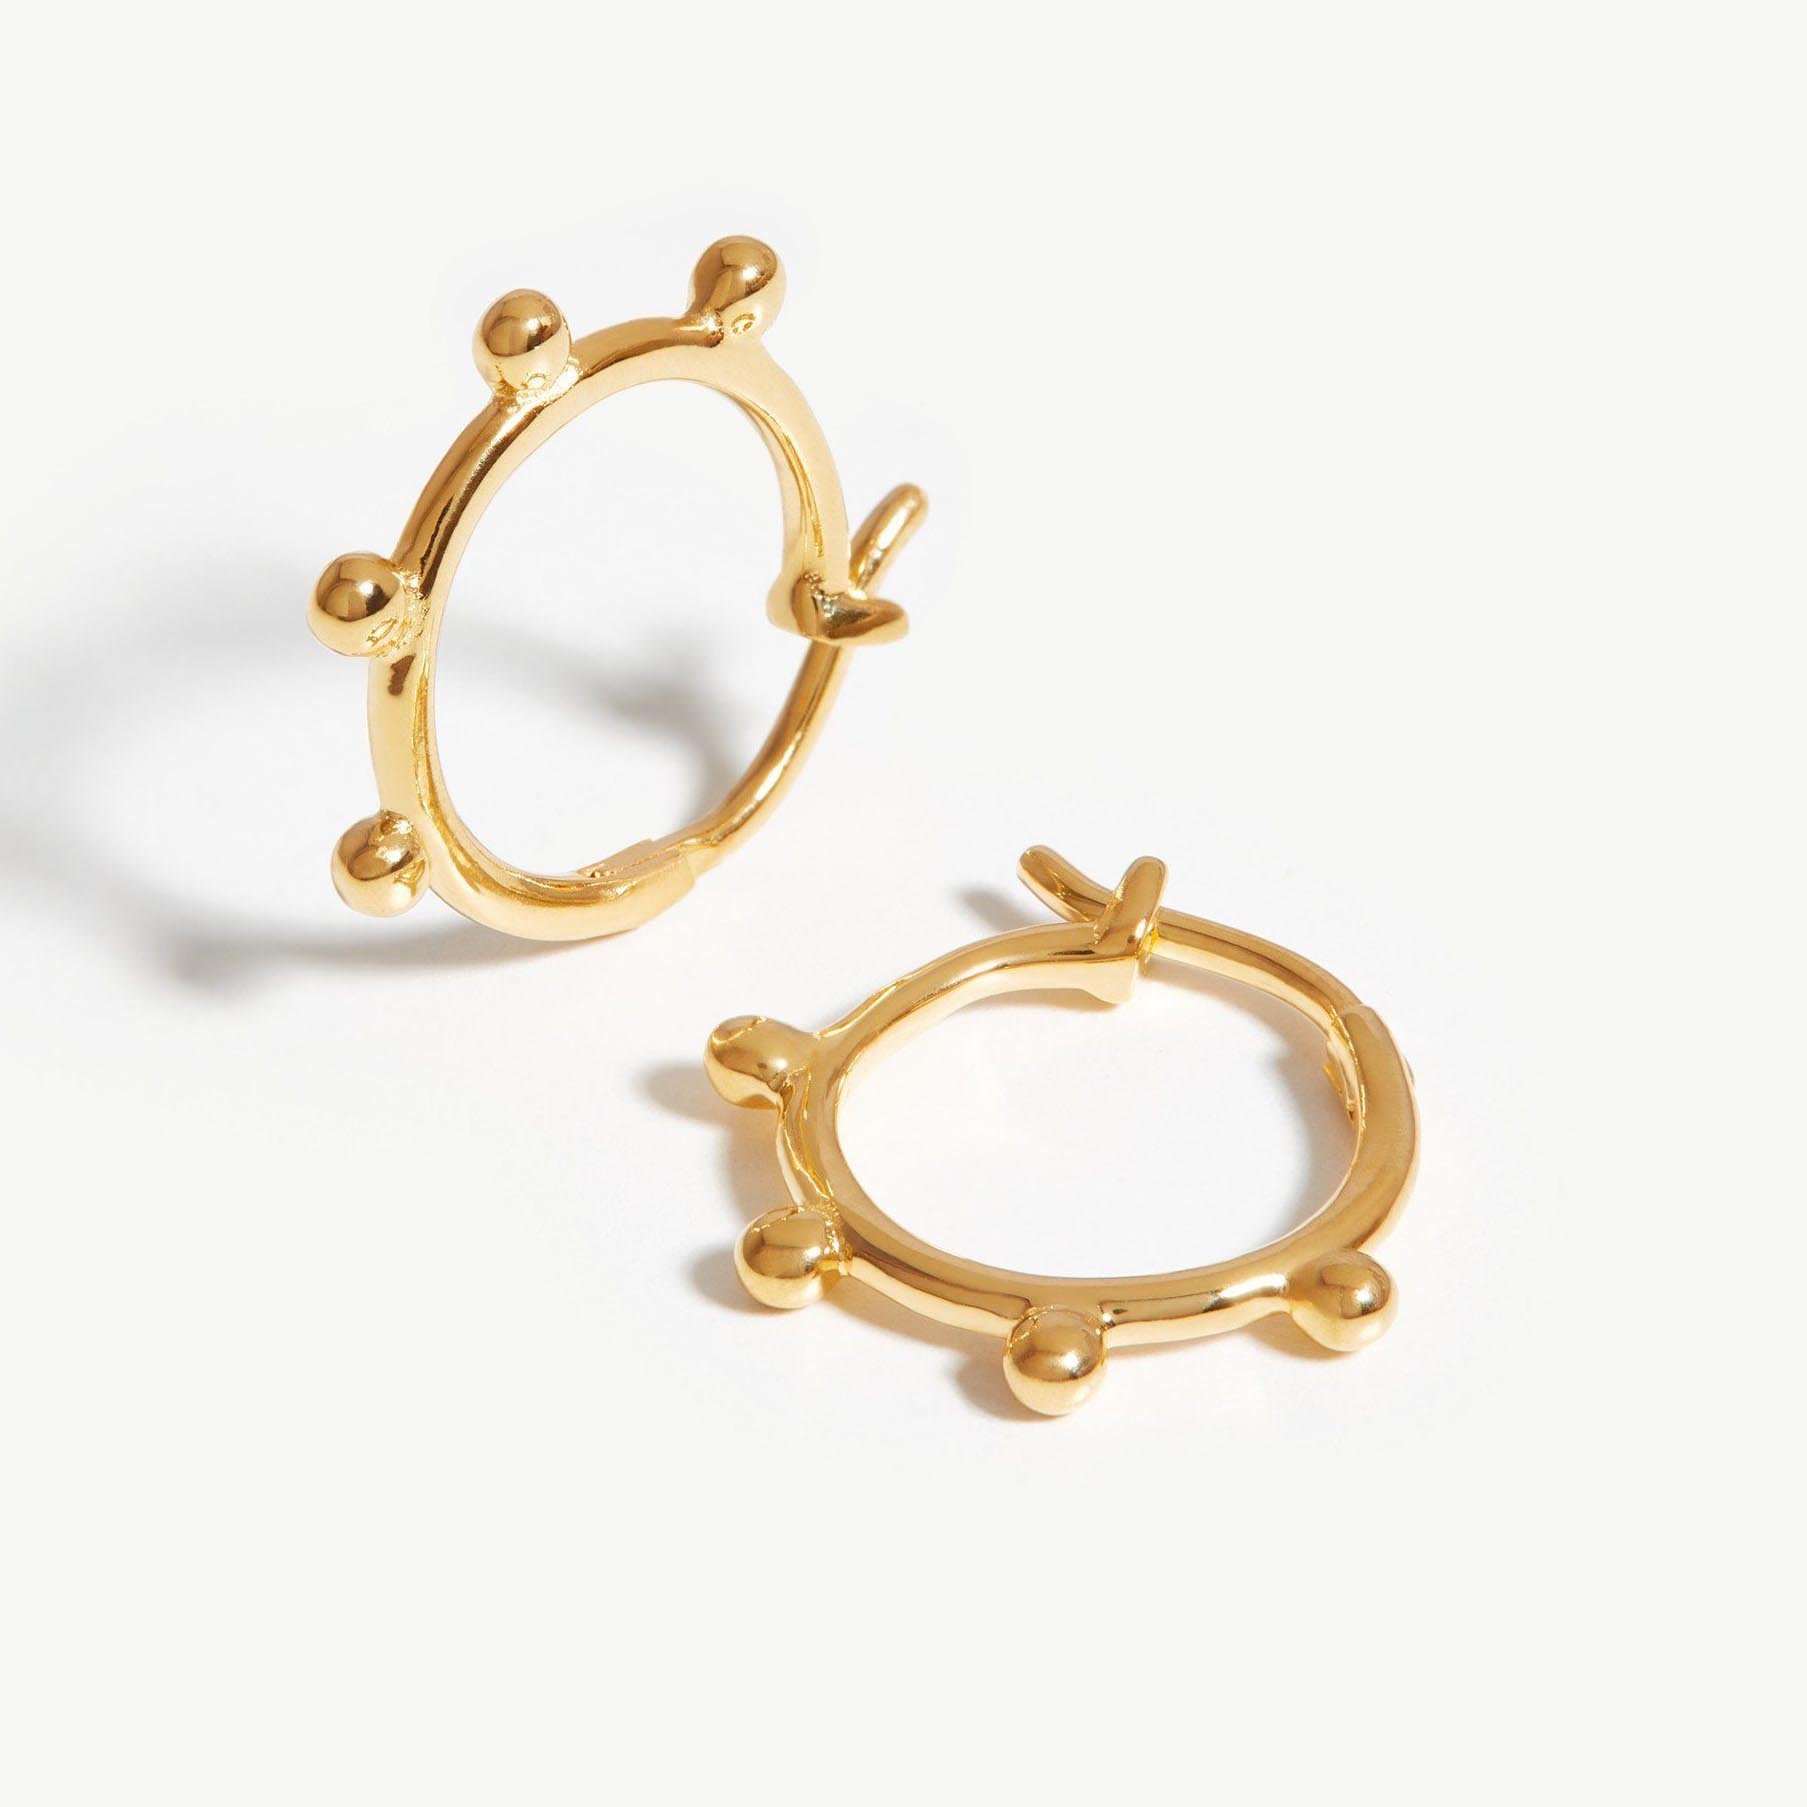 make a gold plated earrings based on your own design